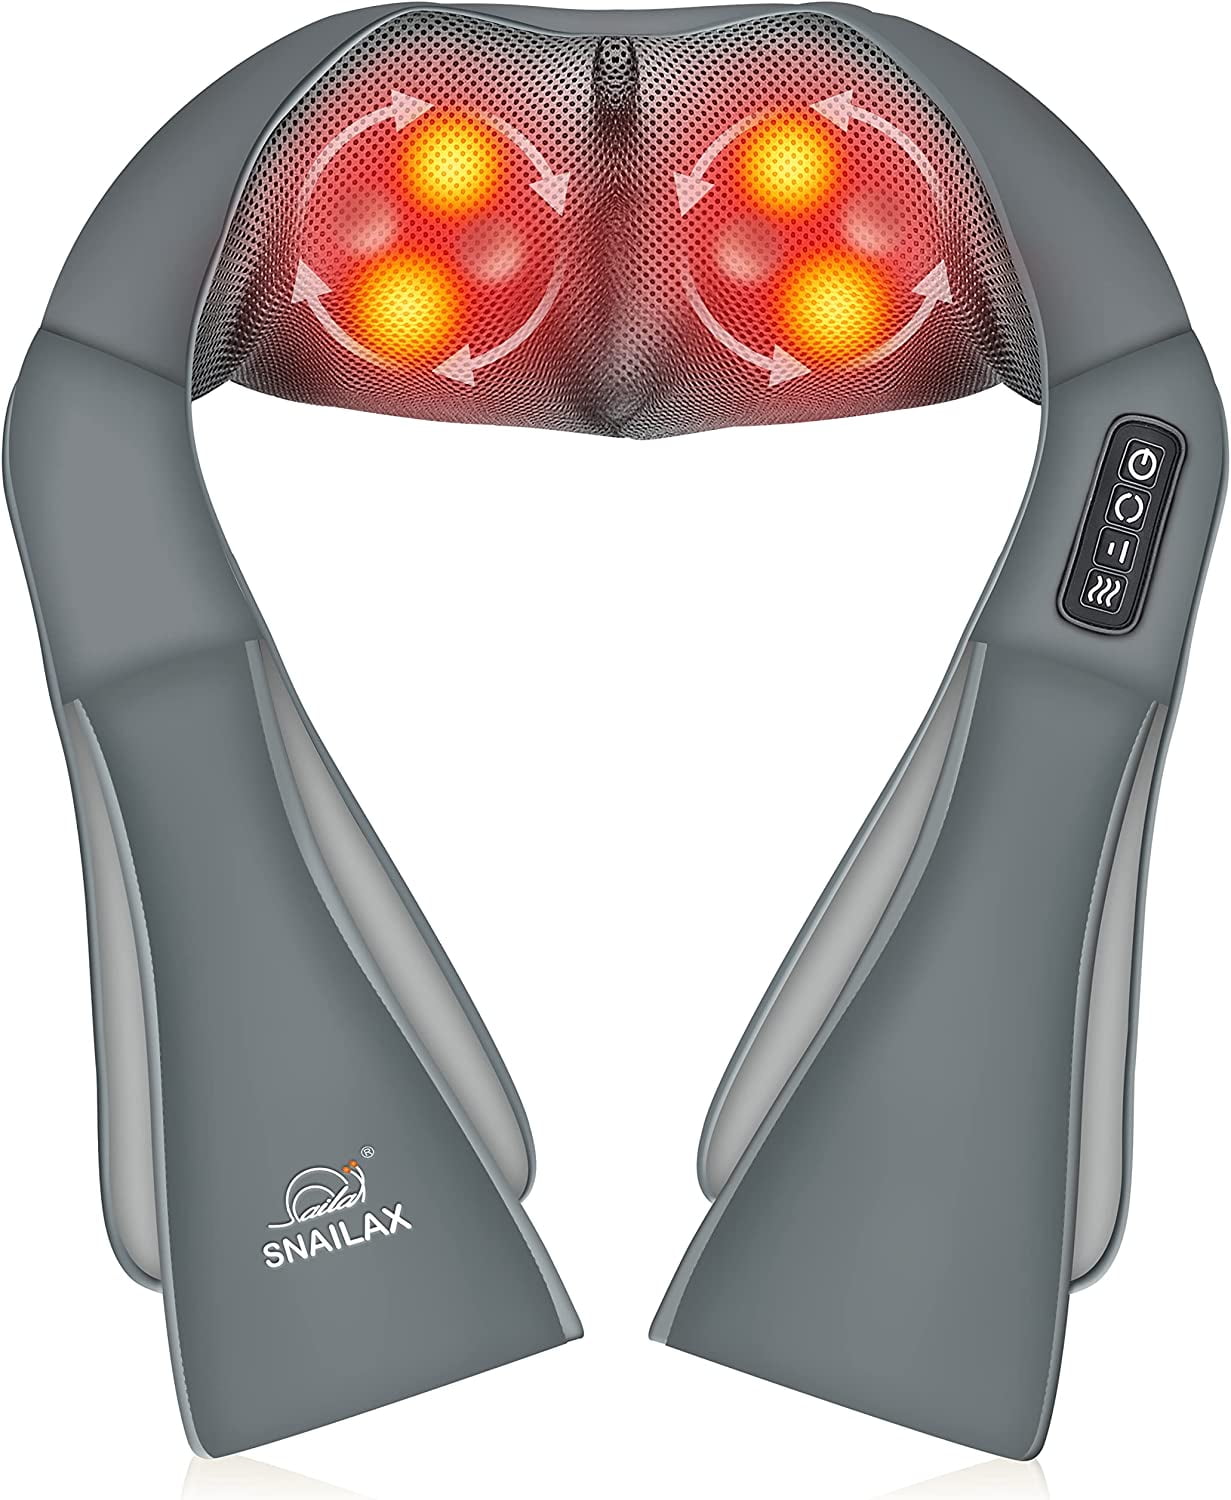  Snailax Shiatsu Neck and Shoulder Massager - Back Massager with  Heat, Deep Kneading Electric Massage Pillow for Neck, Back, Shoulder,Foot  Body (Grey) : Health & Household